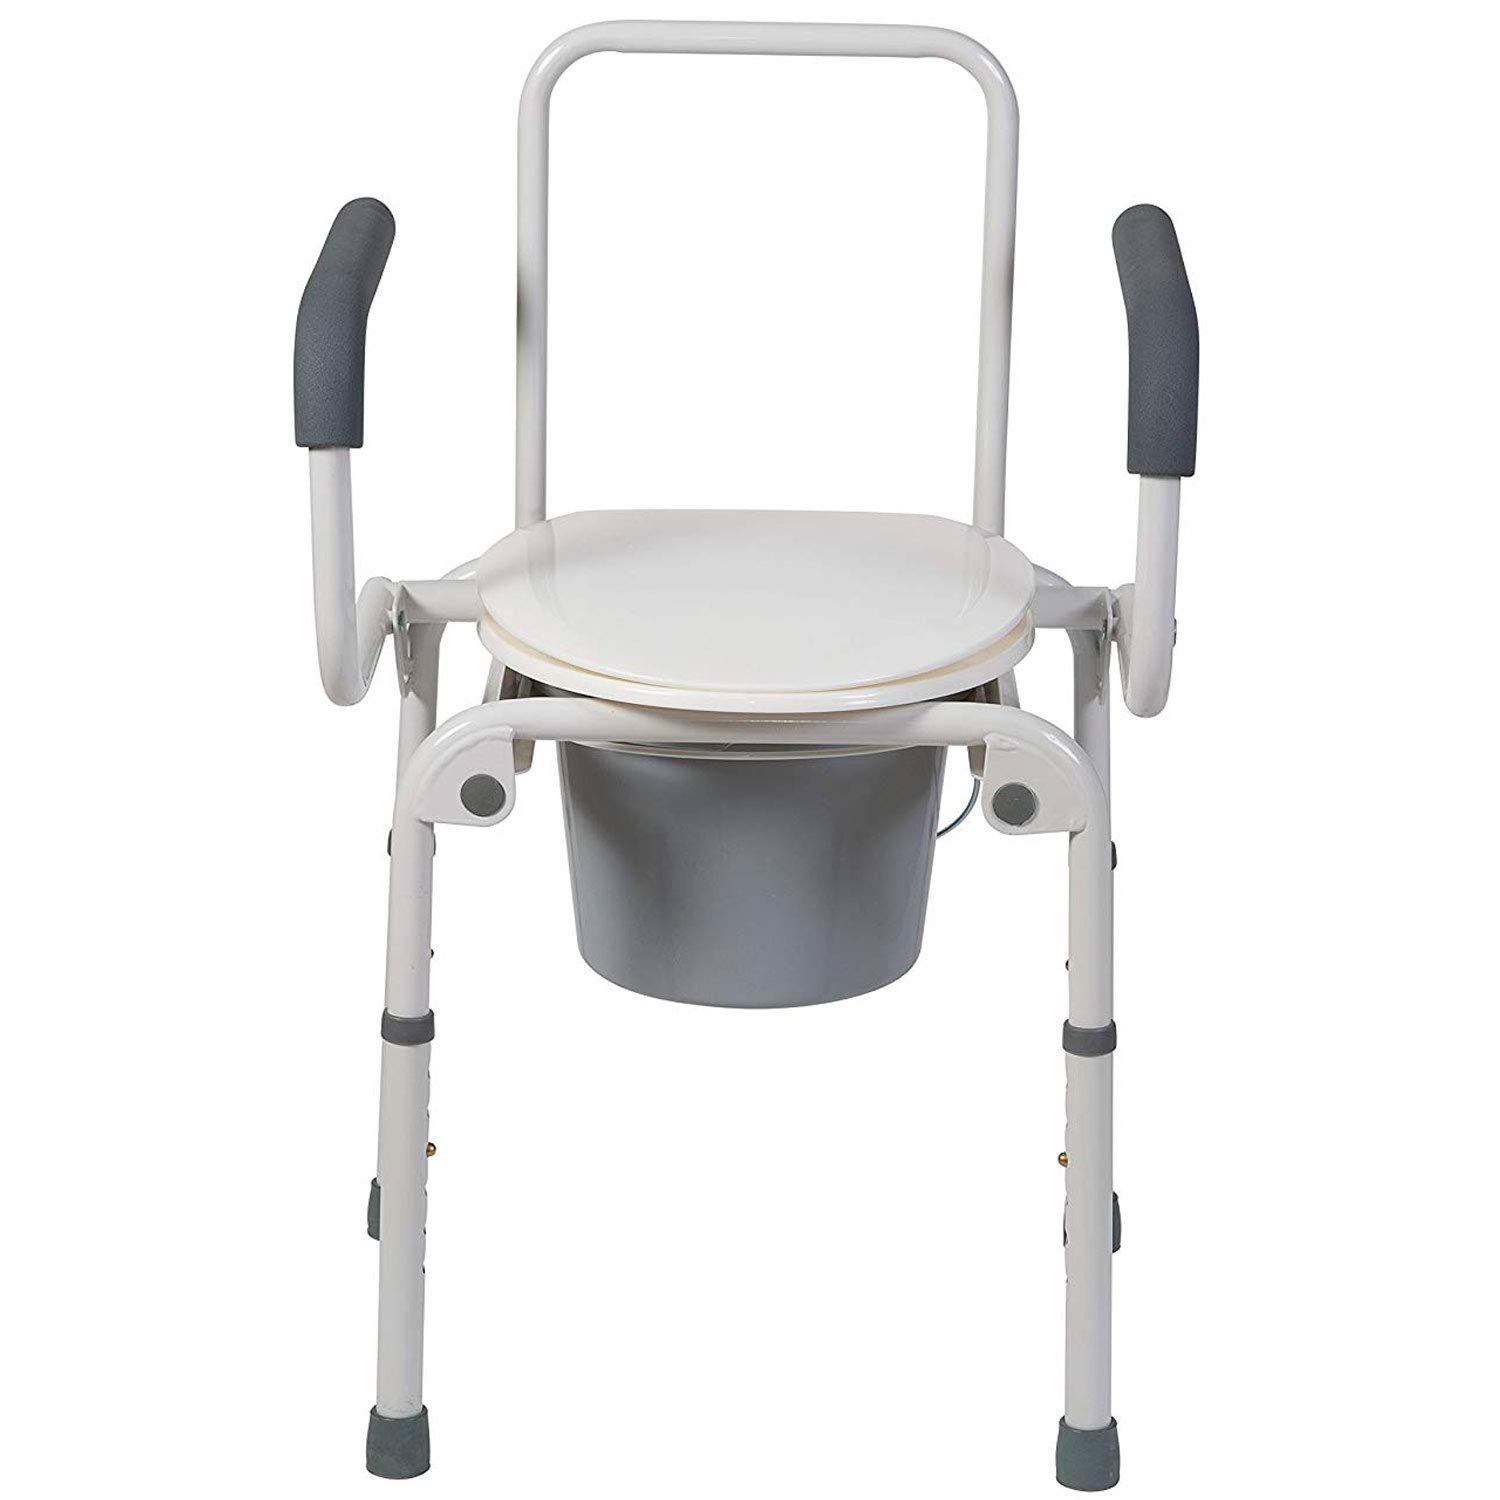 DMI Deluxe Commode for The Elderly, Drop Arm Commode for Easy Transfers, Portable Toilet for Adults, Steel Portable Toilet or Porta Potty, Easy No Tool Assembly, White